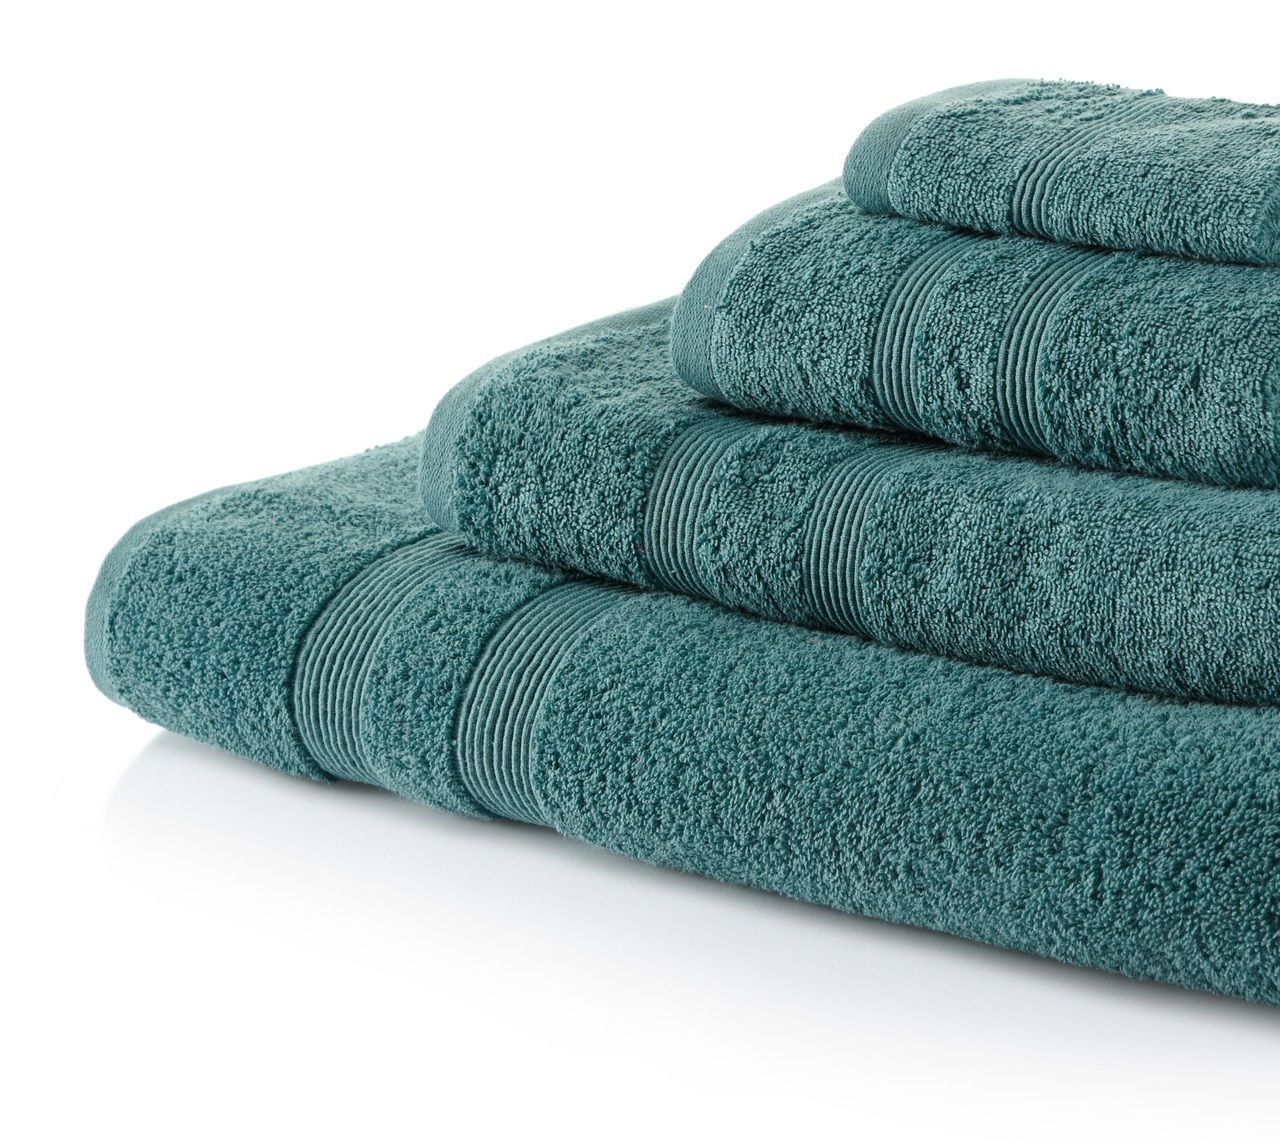 Egyptian Cotton 500g Towels in 4 Colours - 2 Sizes